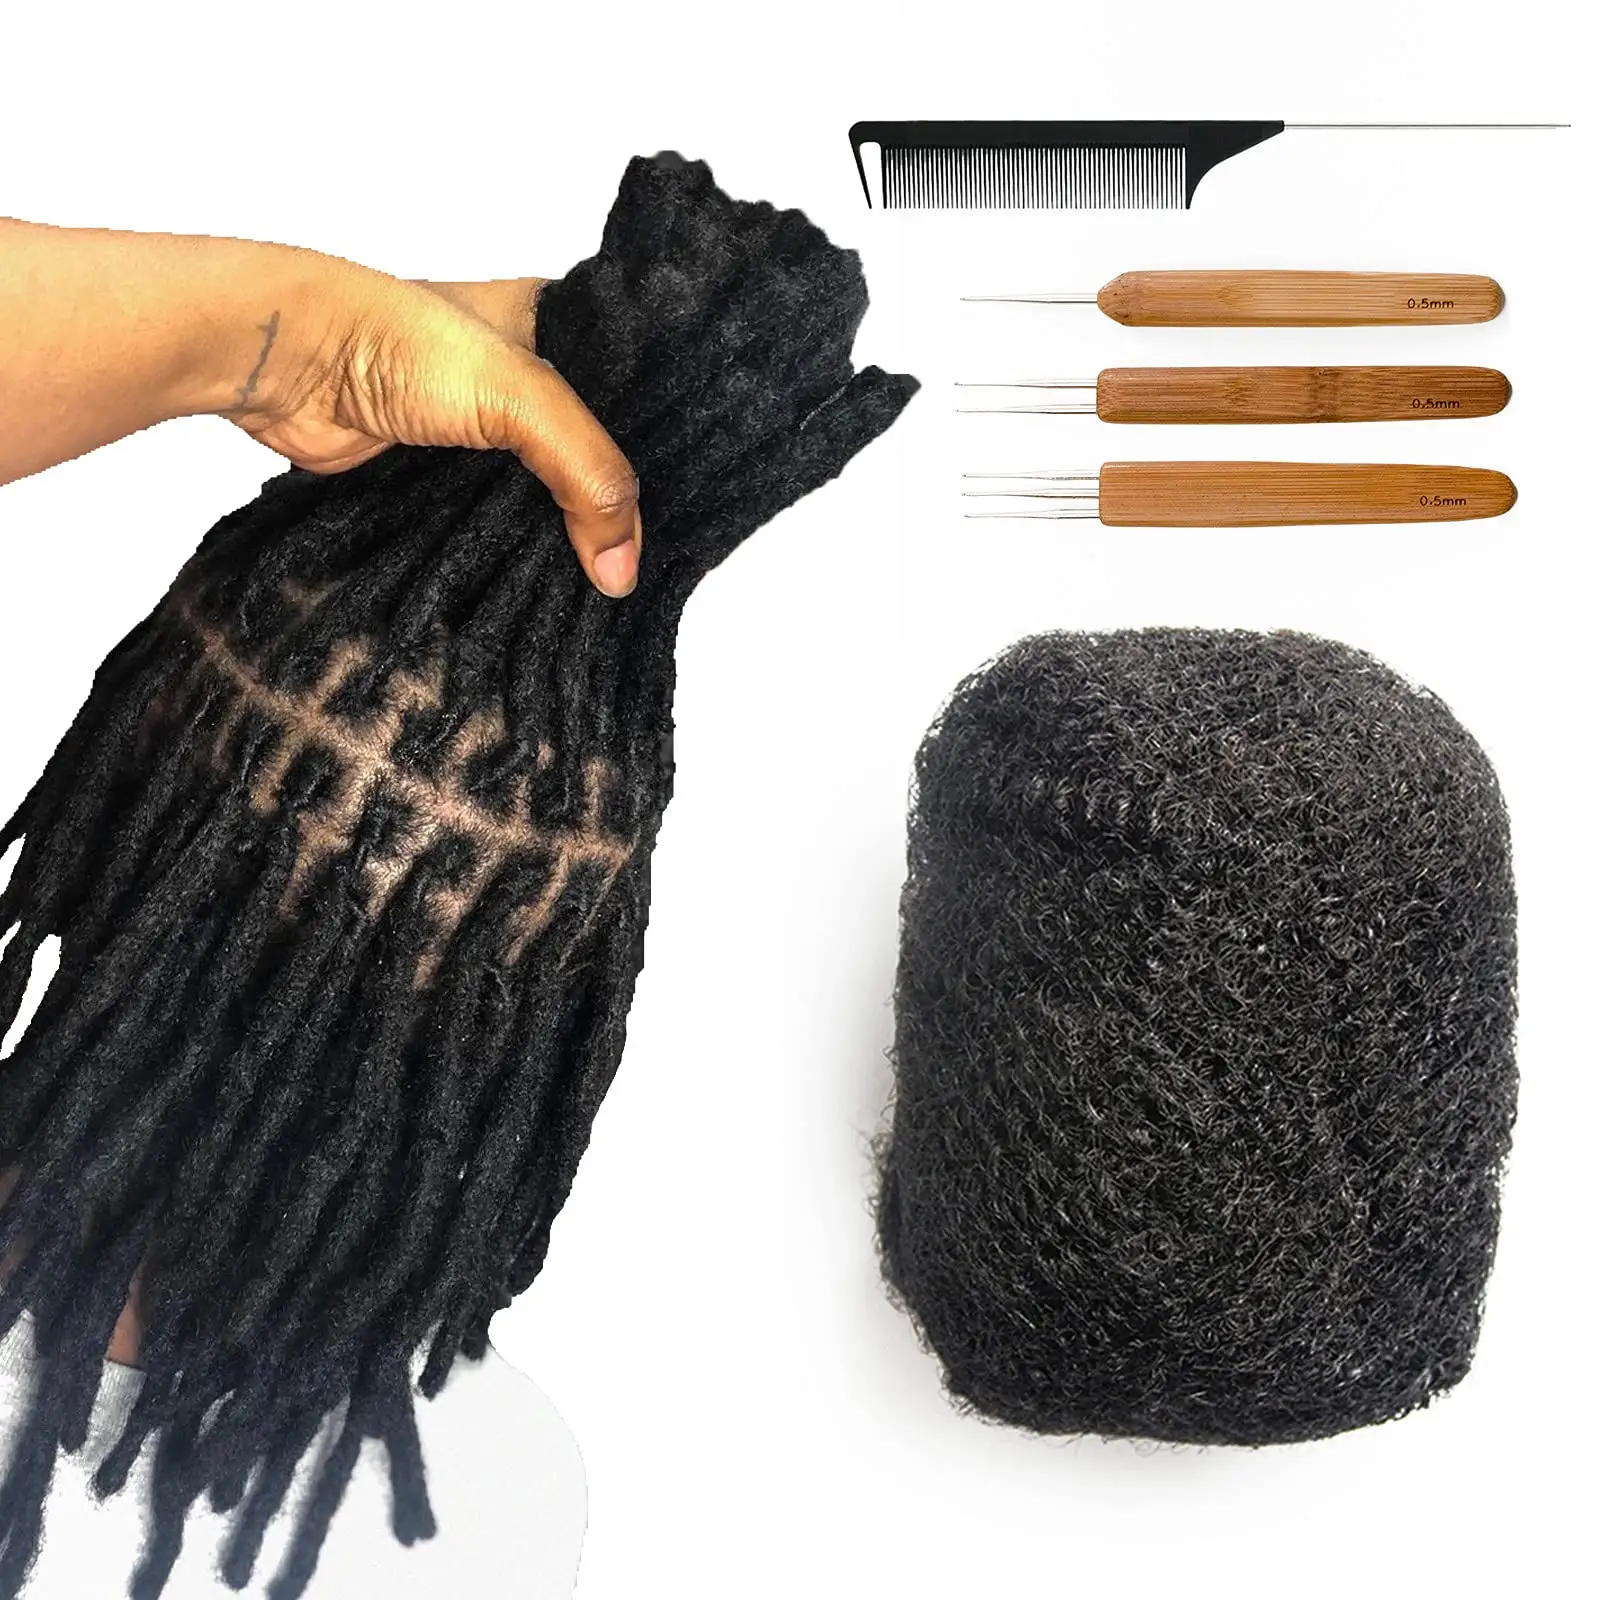 Wholesale Tight Afro Kinky Curly Brazilian Human Hair The Preferred Hair Material for Dreadlocks and Extensions